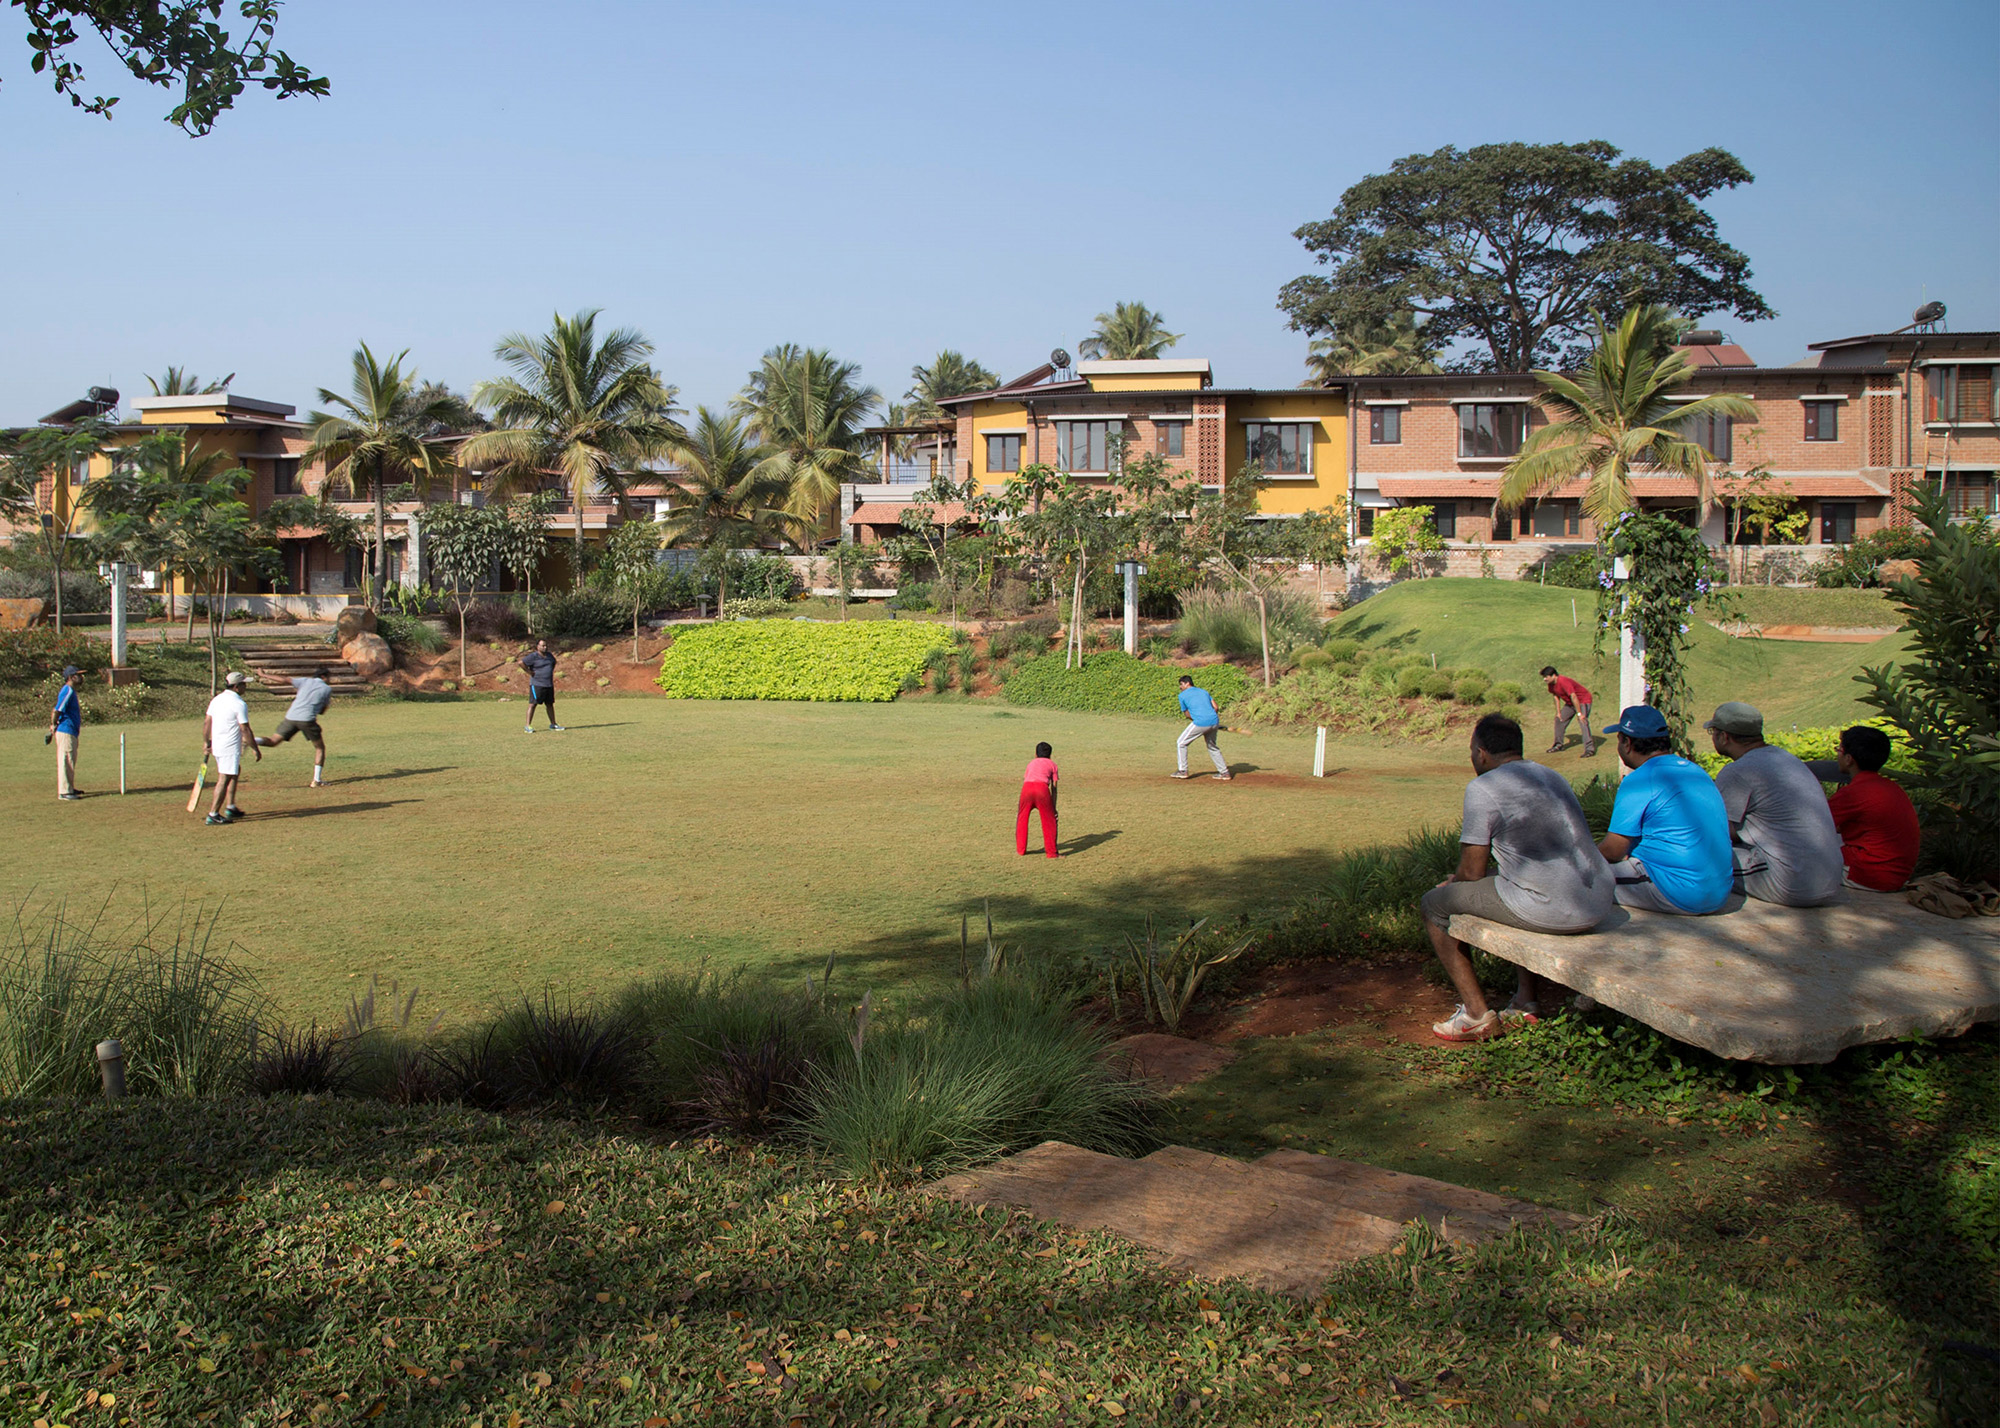 Community park being used to play cricket on a Sunday morning